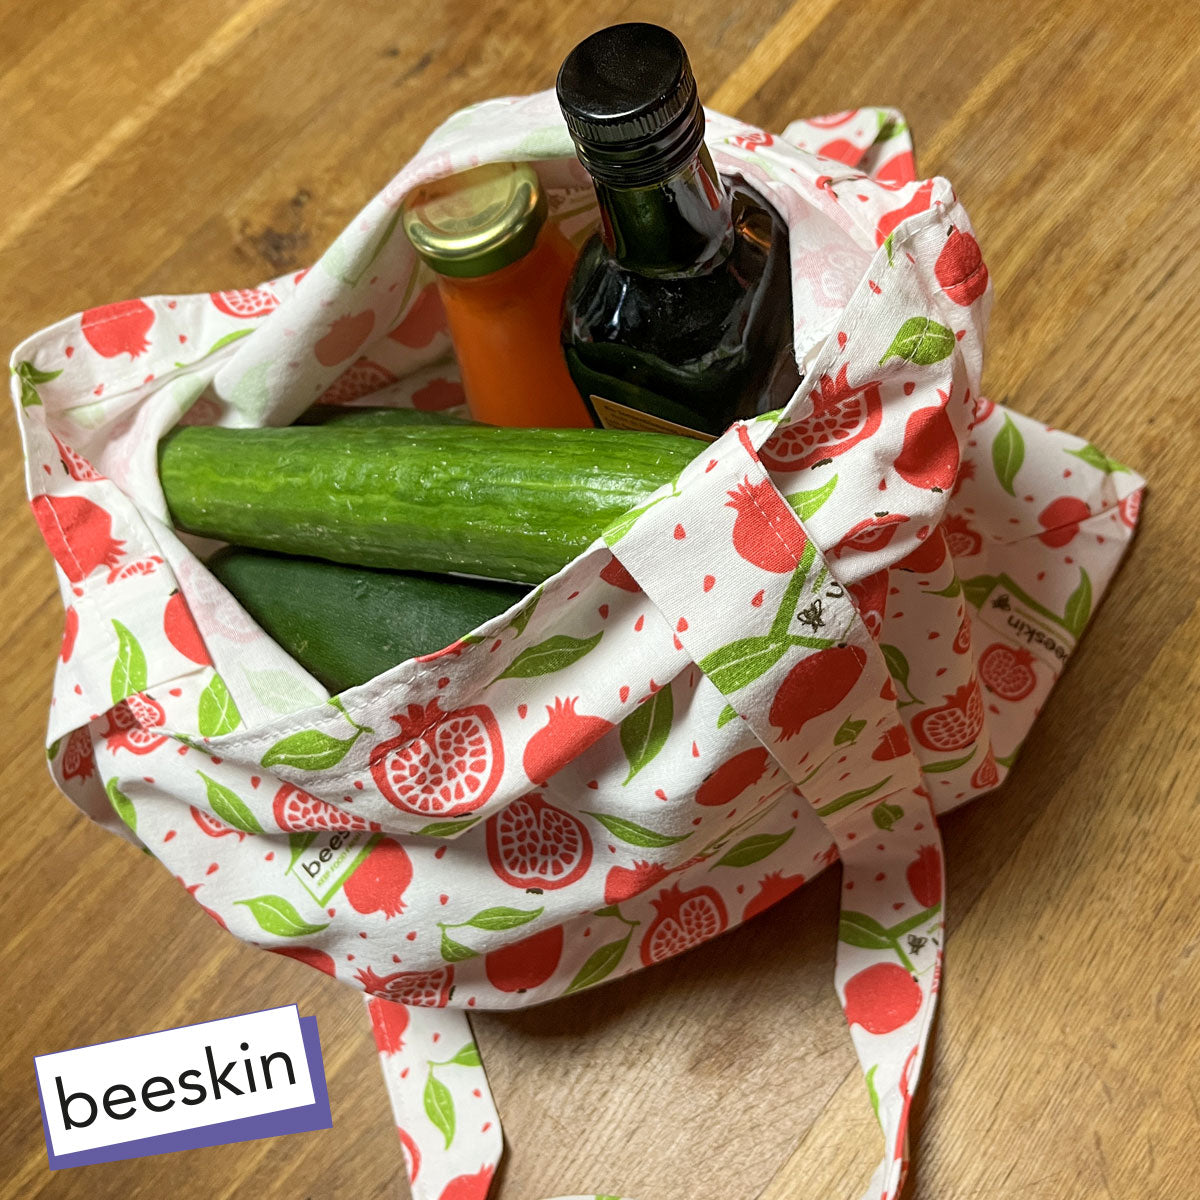 beeskin cotton-bag-pomegranate filled with cucumber and olive oil